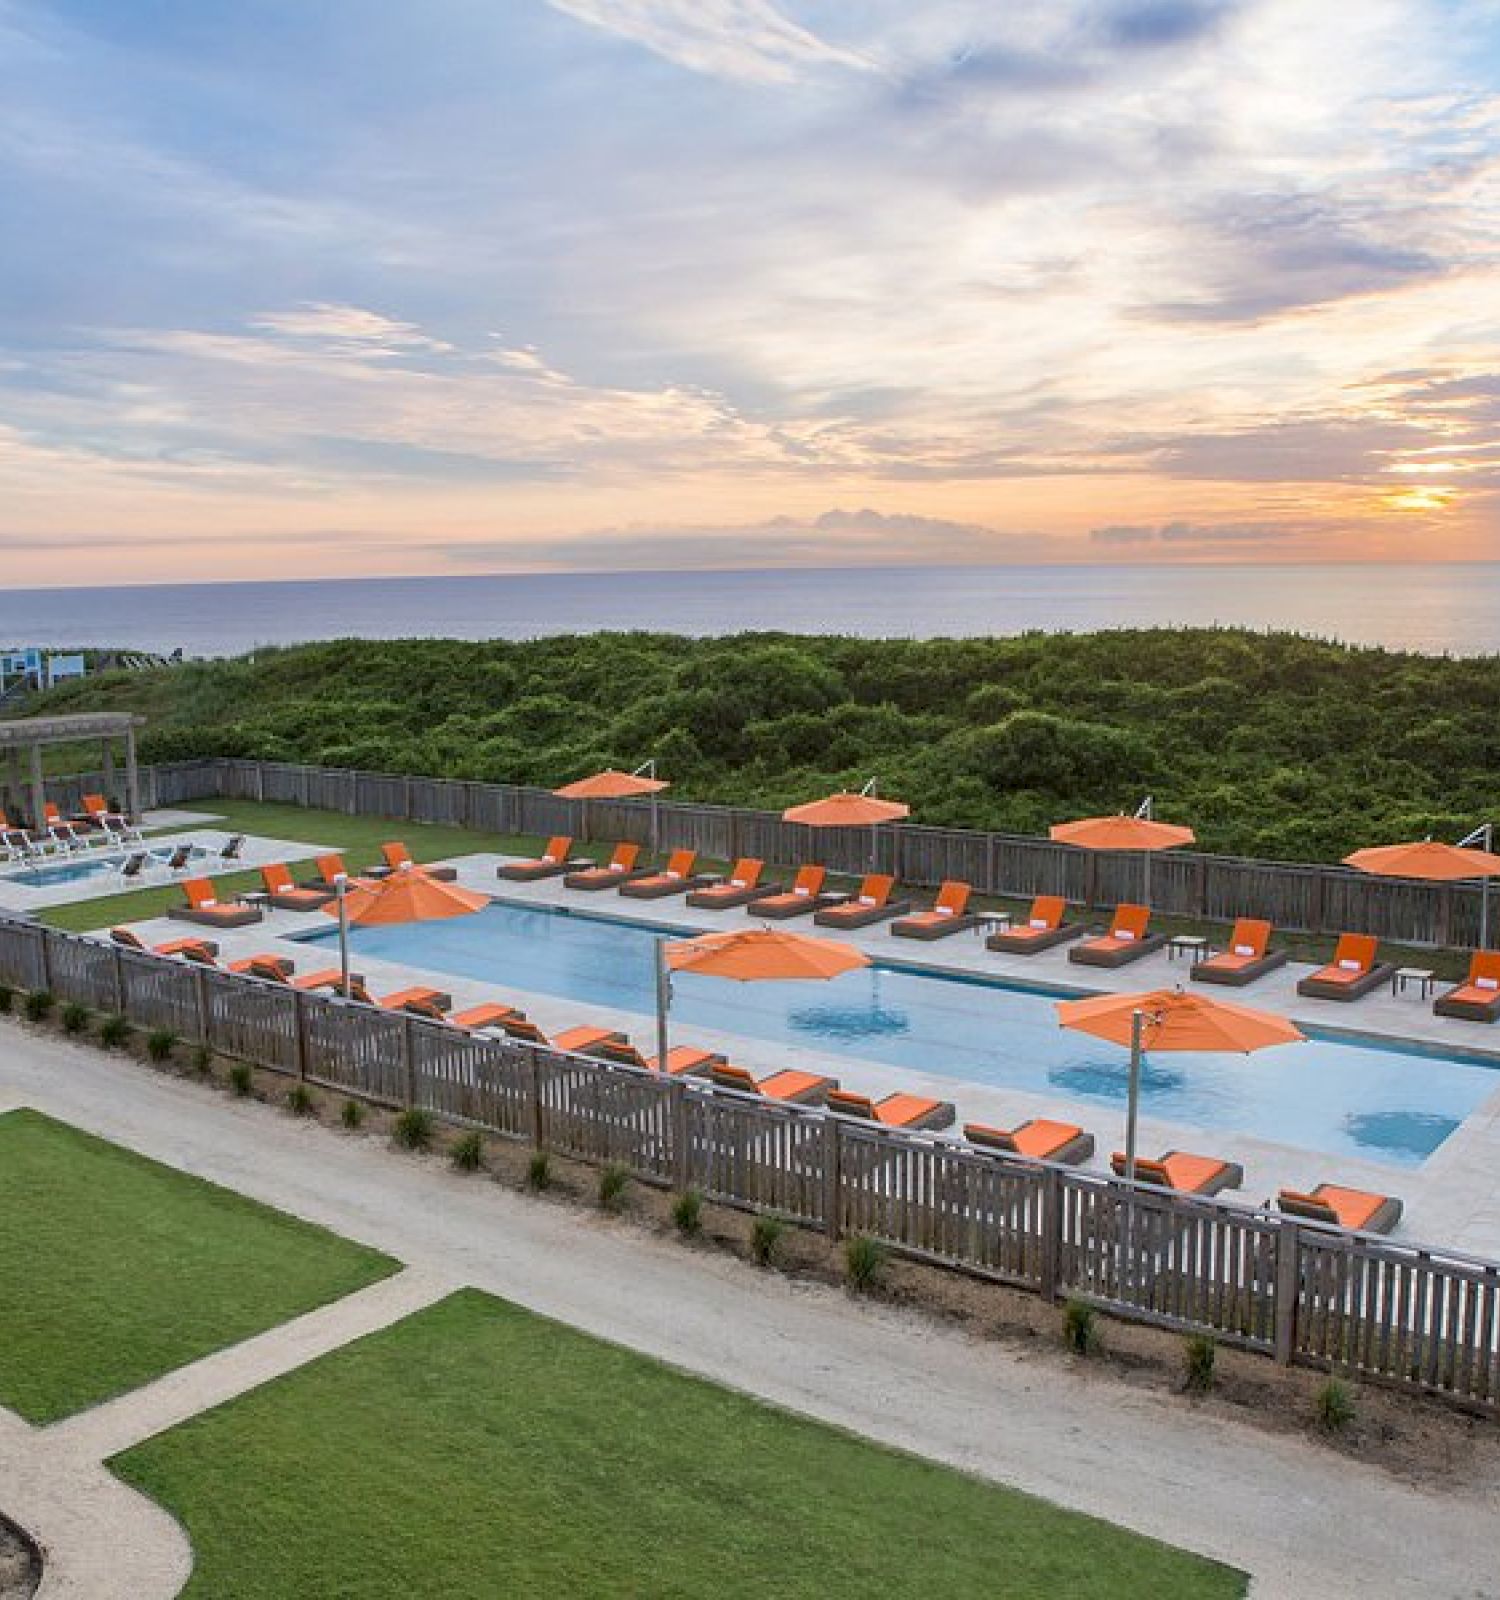 A pool area with orange parasols and lounge chairs, surrounded by greenery and a rustic fence, overlooking a serene ocean sunset.